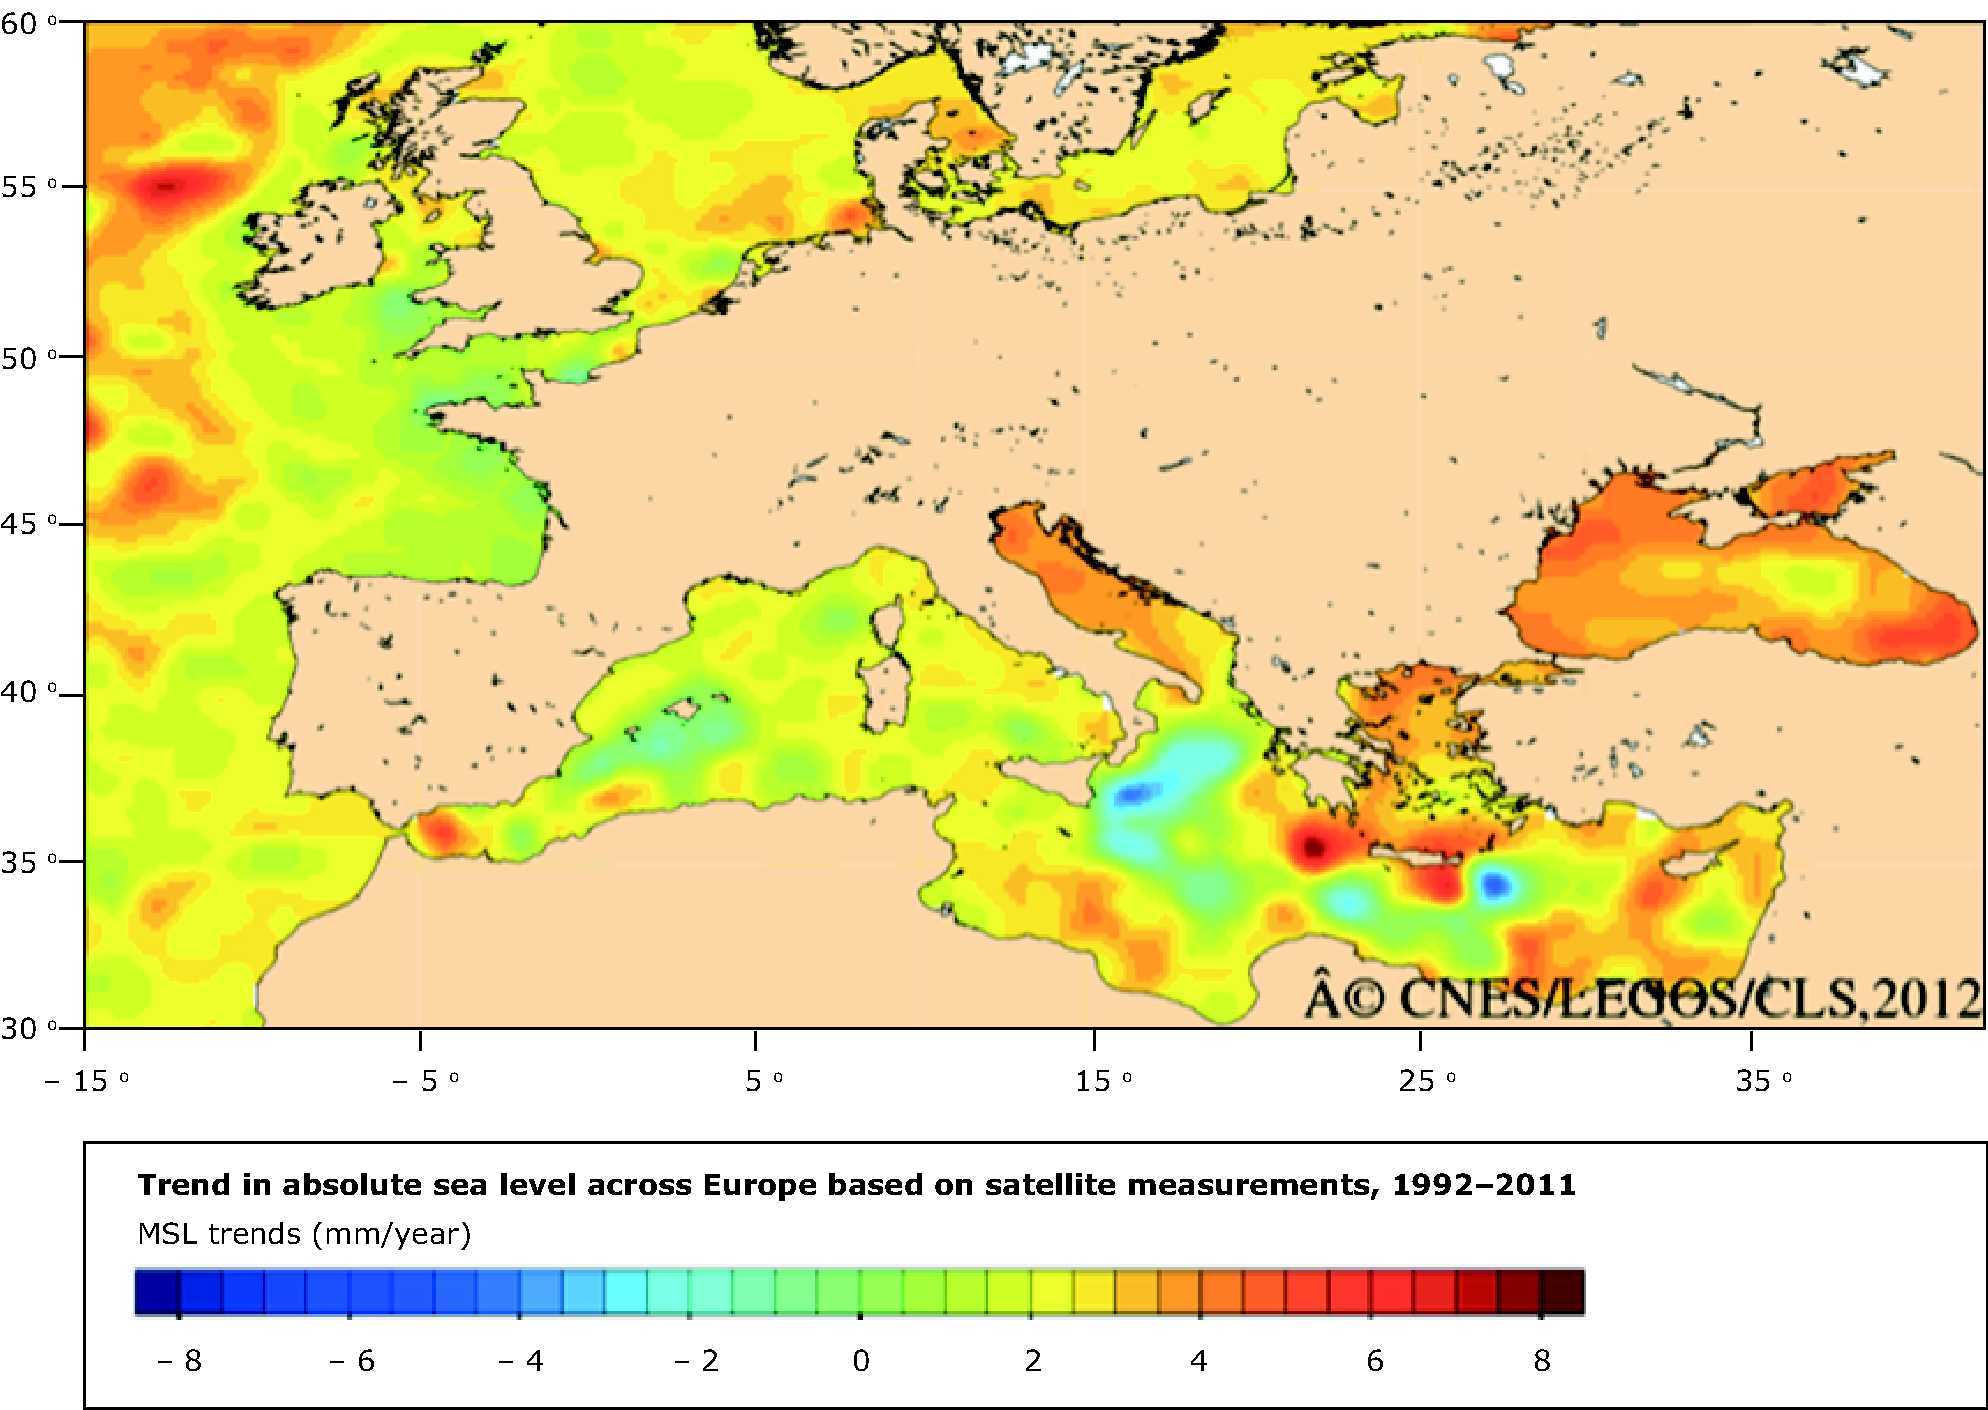 Trend in absolute sea level across Europe based on satellite measurements (1992–2011)